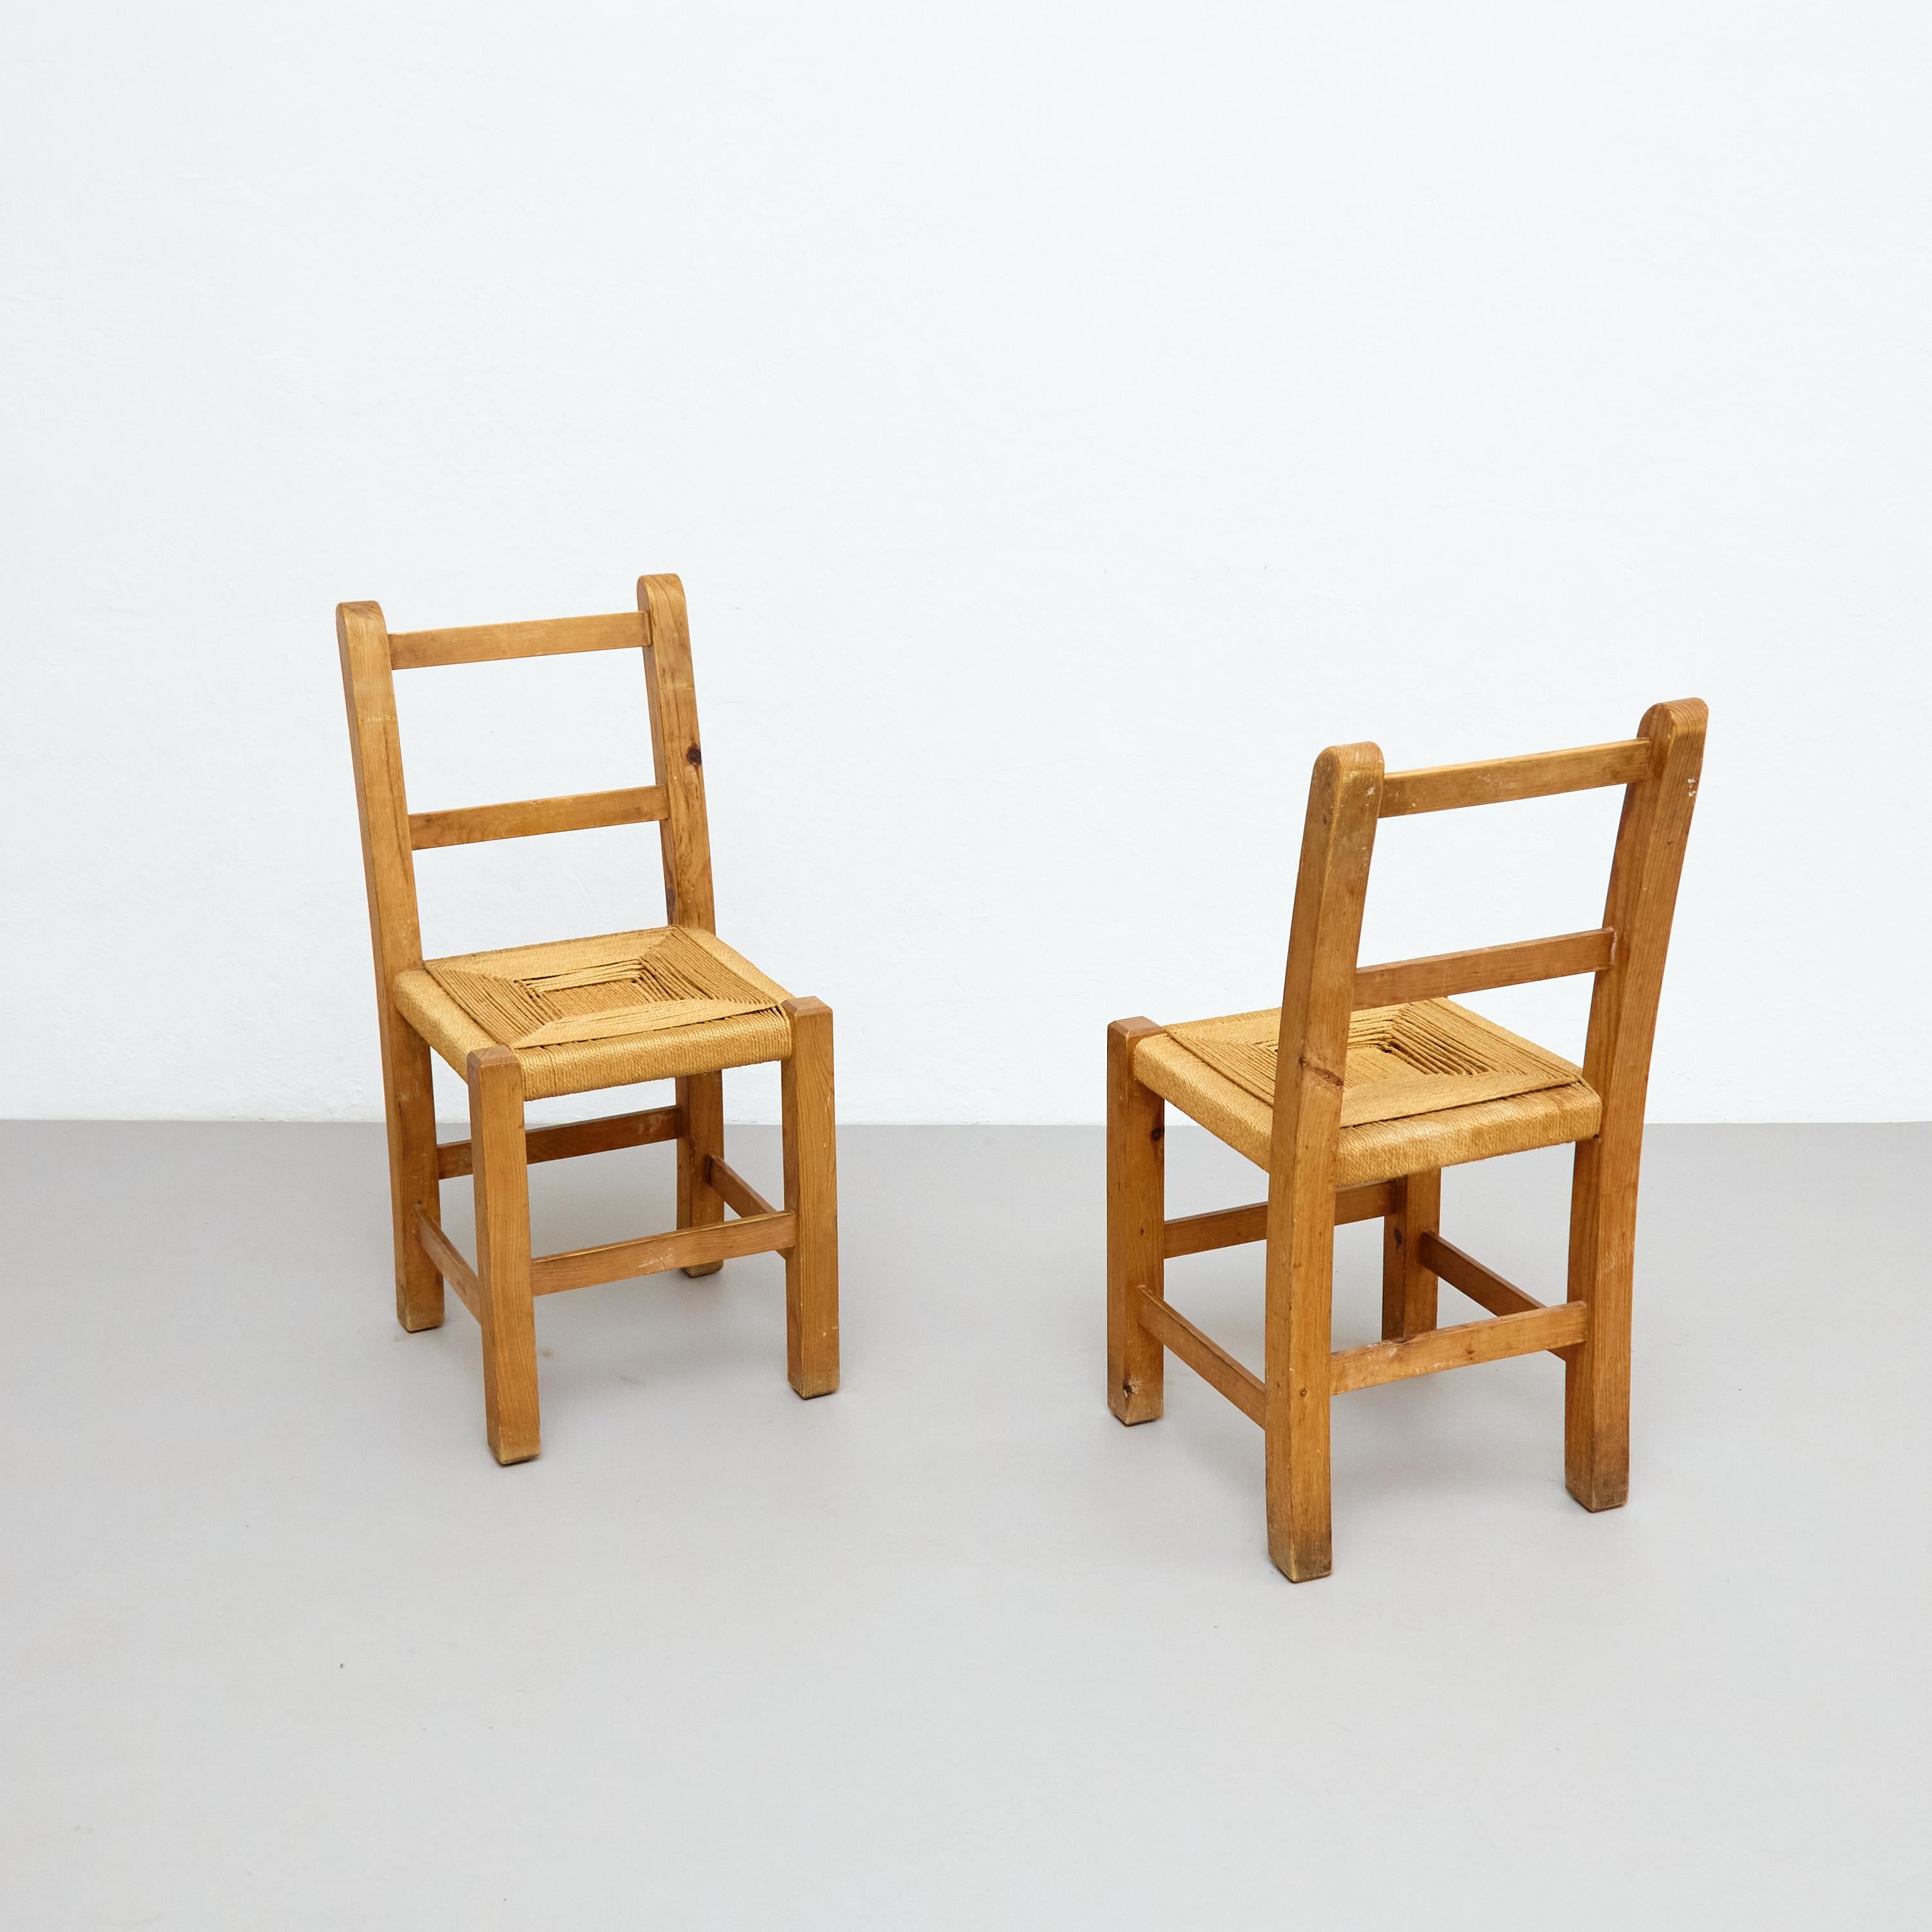 Pair of Mid-Century Modern Wood and Rattan French Rationalist Chairs, circa 1950 In Good Condition For Sale In Barcelona, Barcelona